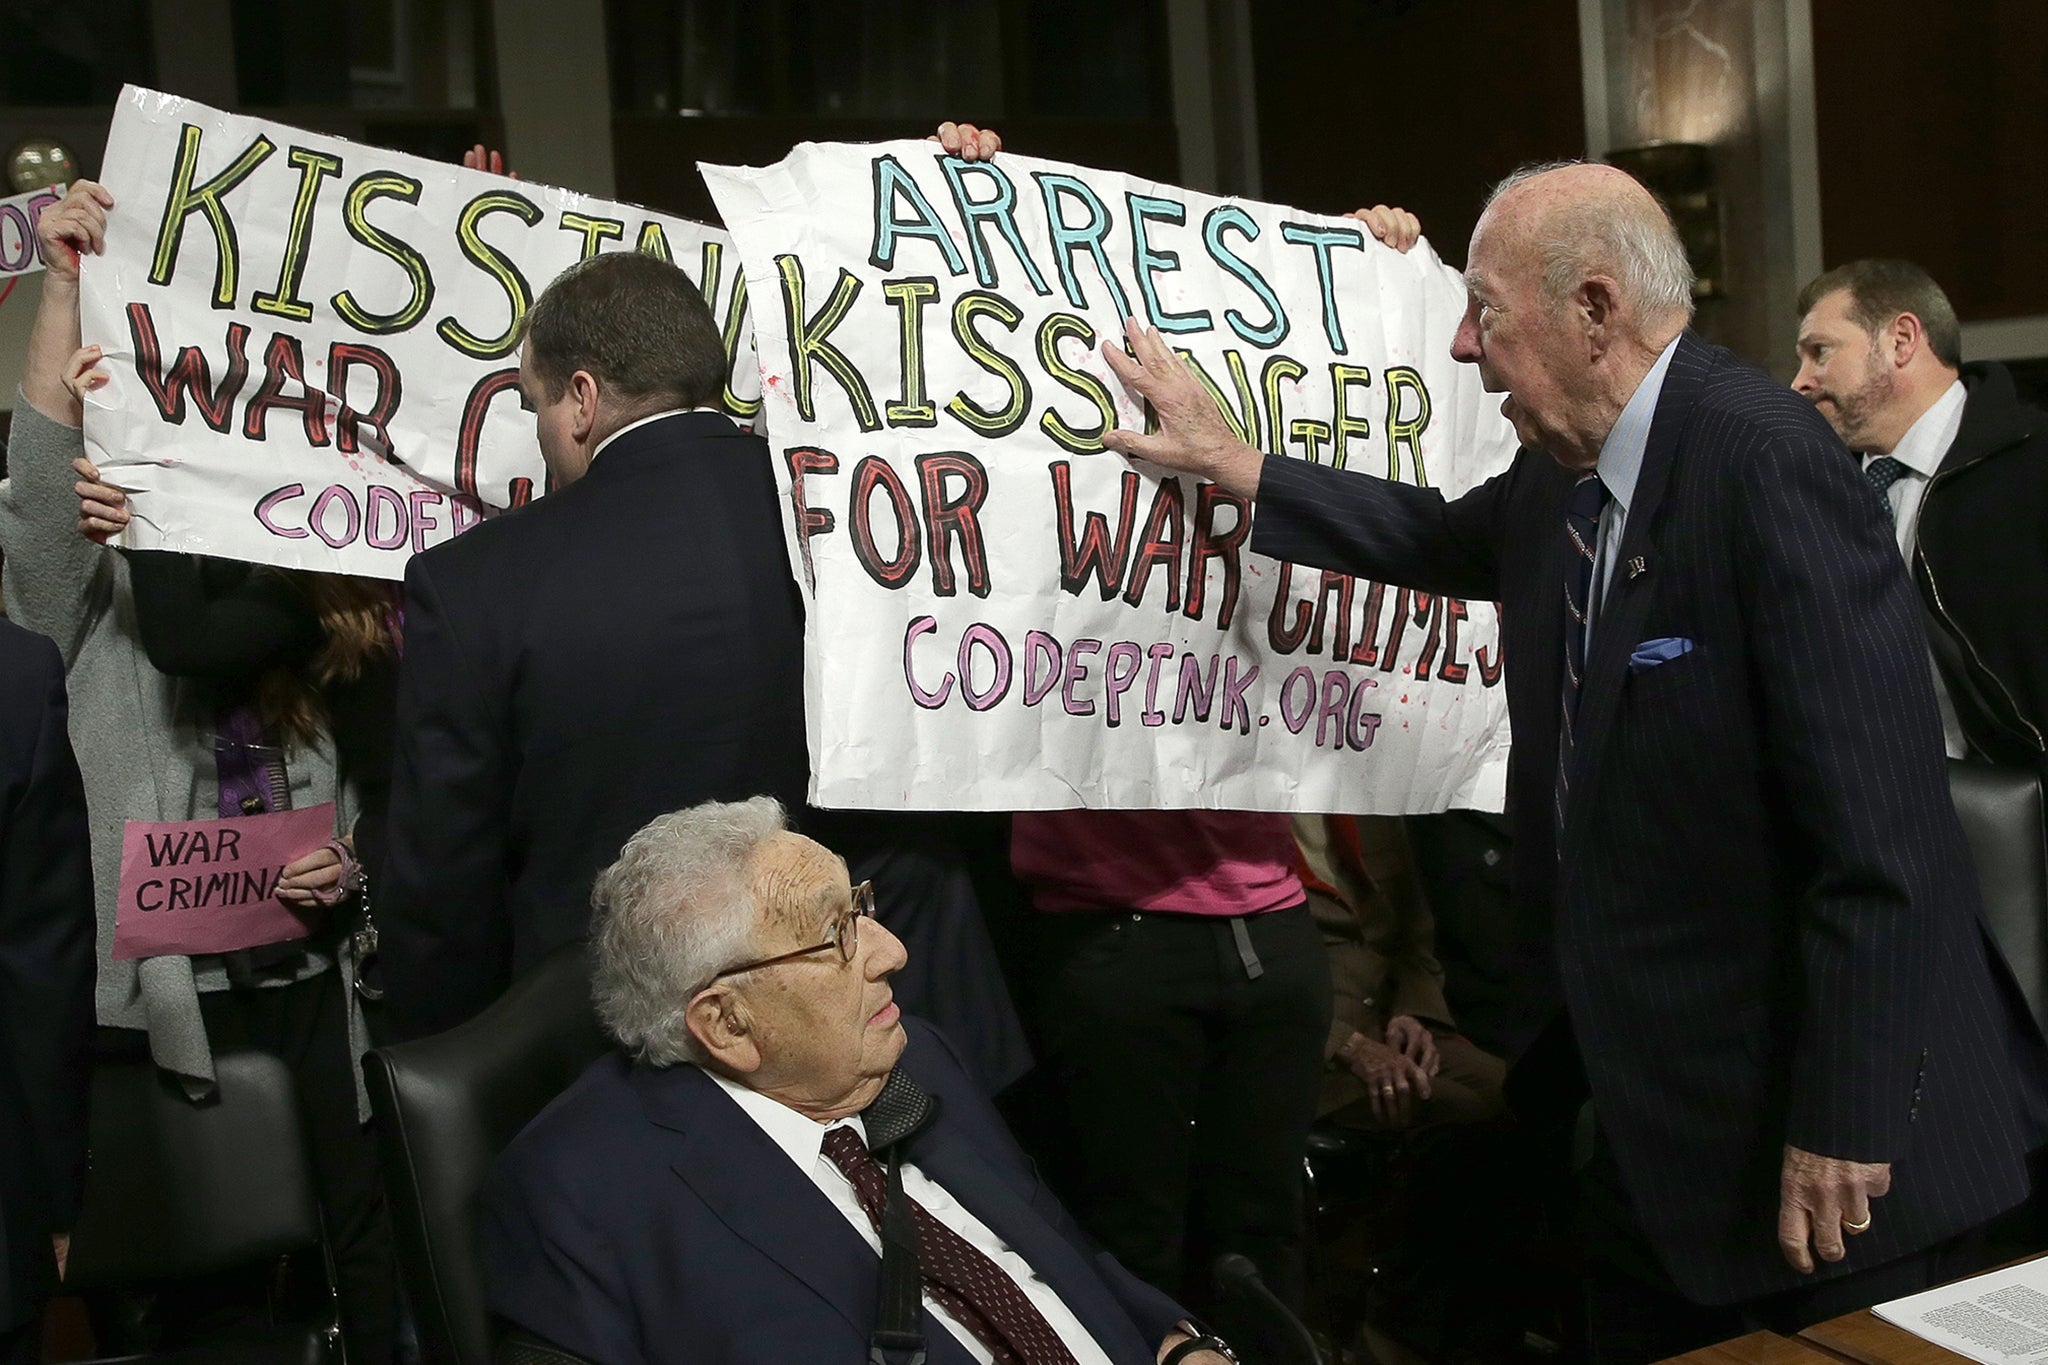 Former US Secretary of State George Shultz (C) pushes away protesters shouting "Arrest Henry Kissinger for war crimes" as former U.S. Secretary of State Henry Kissinger (L) watches prior to the two testifying before the Senate Armed Services Committee 29 January 2015 in Washington, DC.